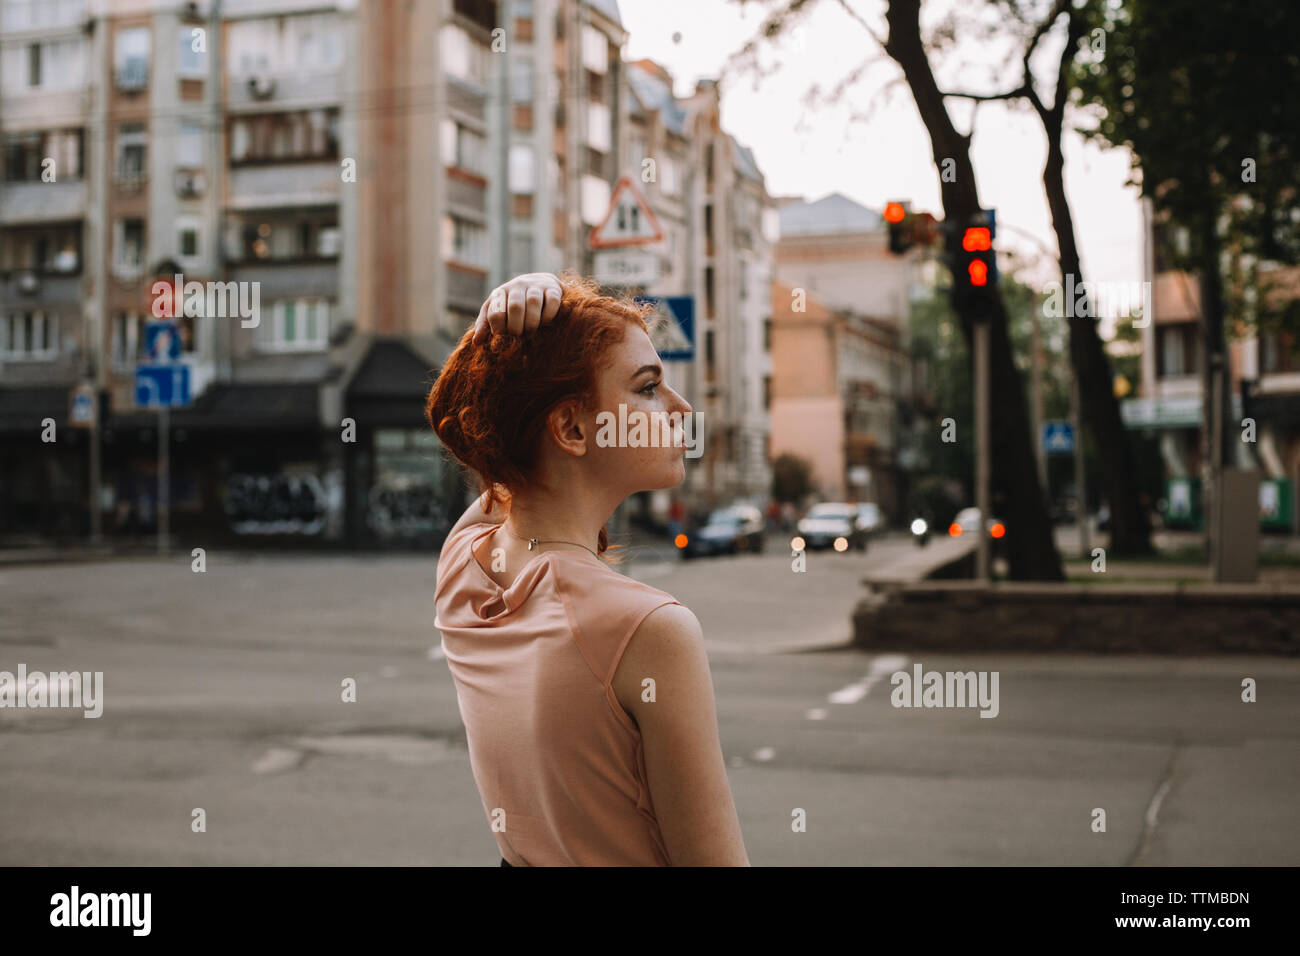 Young redheaded woman holding hair while standing in city street Stock Photo